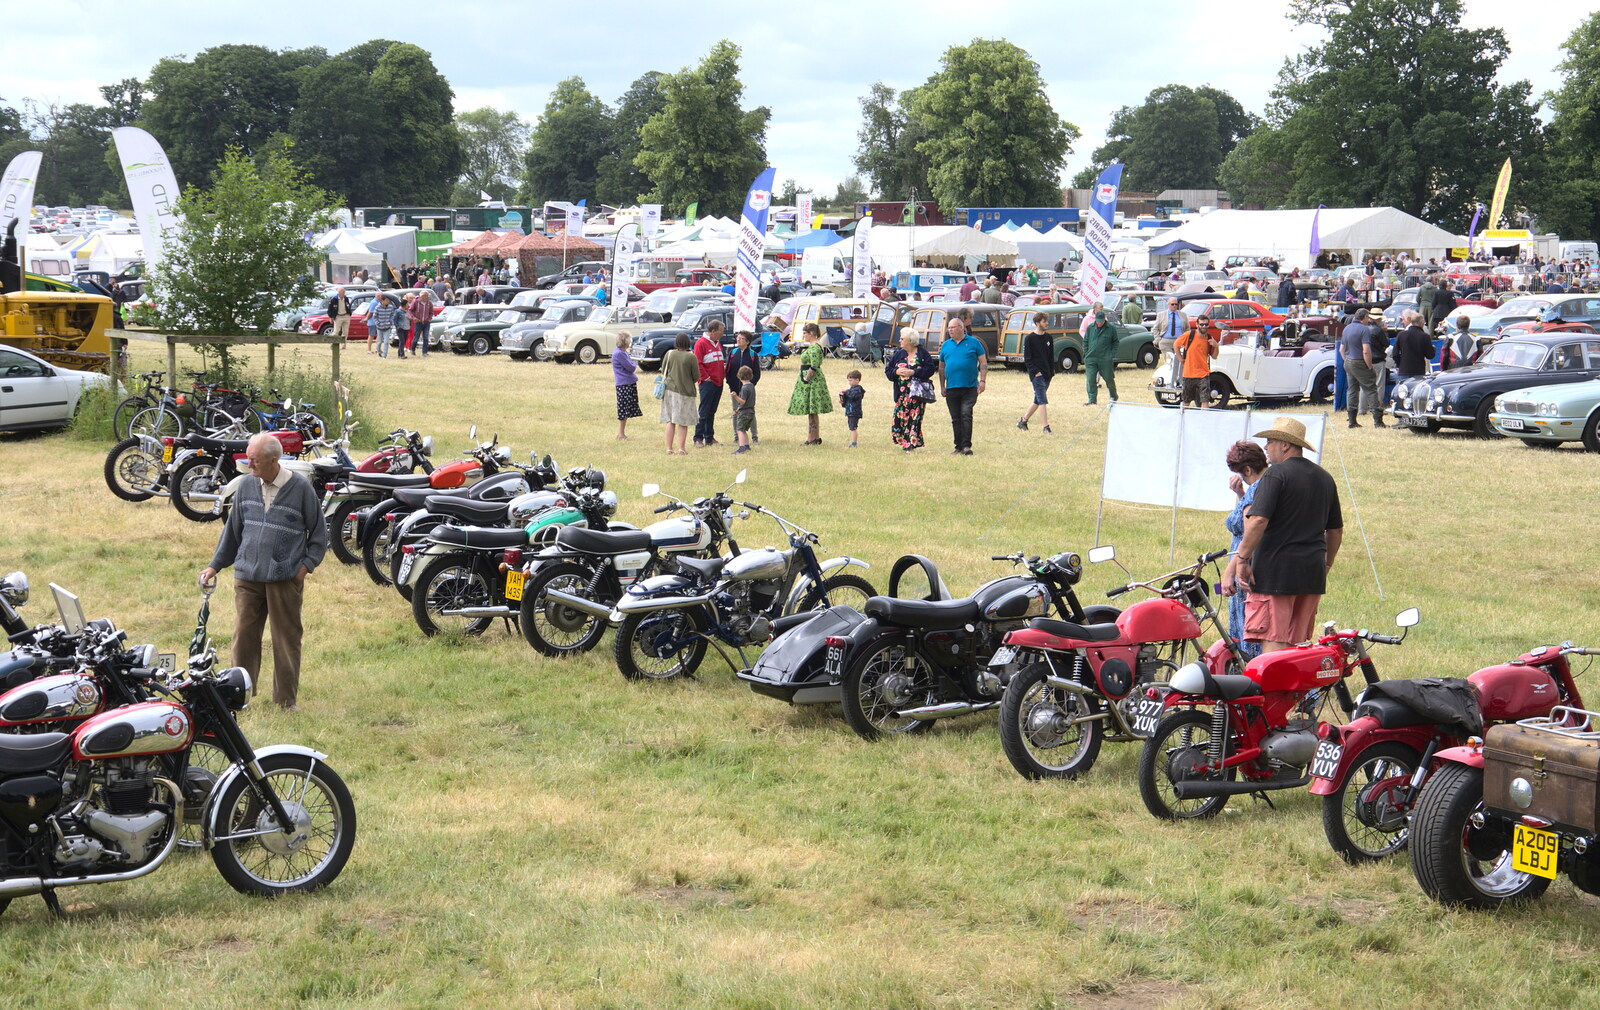 A view of the motorbikes from The Formerly-Known-As-The-Eye-Show, Palgrave, Suffolk - 17th June 2018